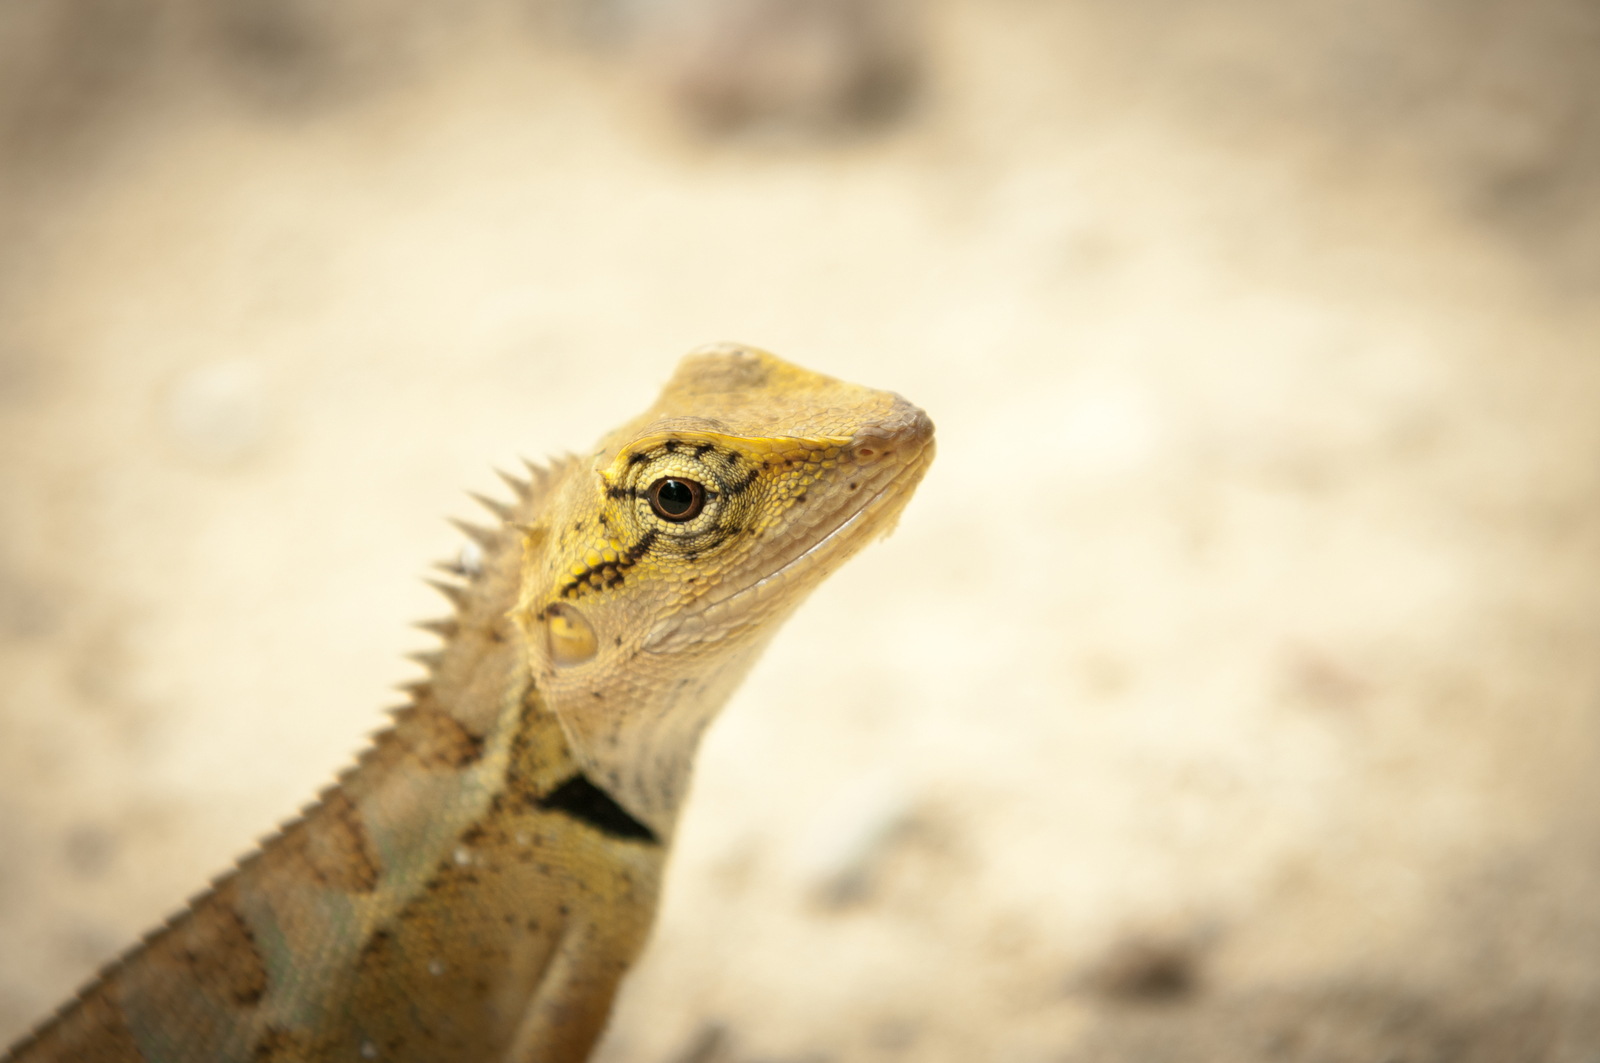 How Do Lizards Clean Themselves ? A Guide to Understanding Self-Cleaning Reptiles